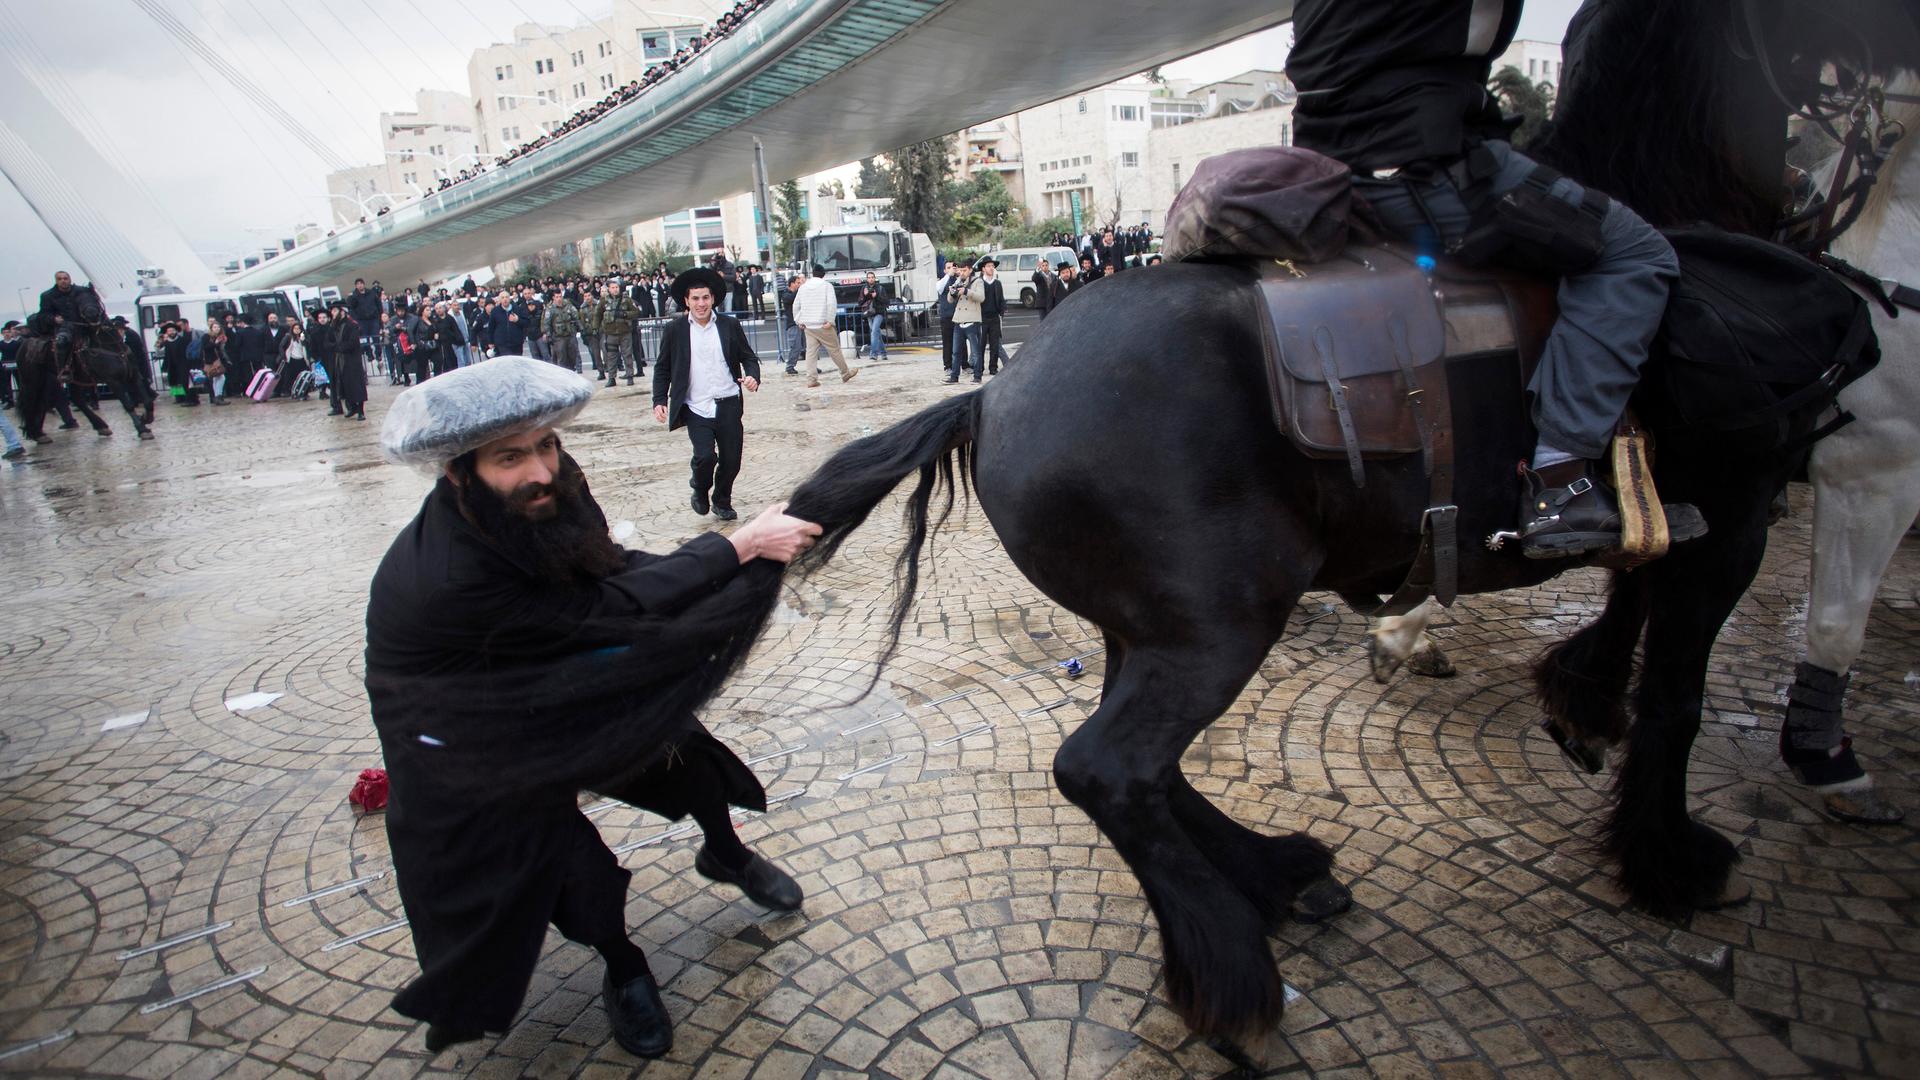 Hundreds of ultra-Orthodox Jews in Israel blocked highways and clashed with police this week to protest a government decision to cut funds to seminary students who avoid military service.